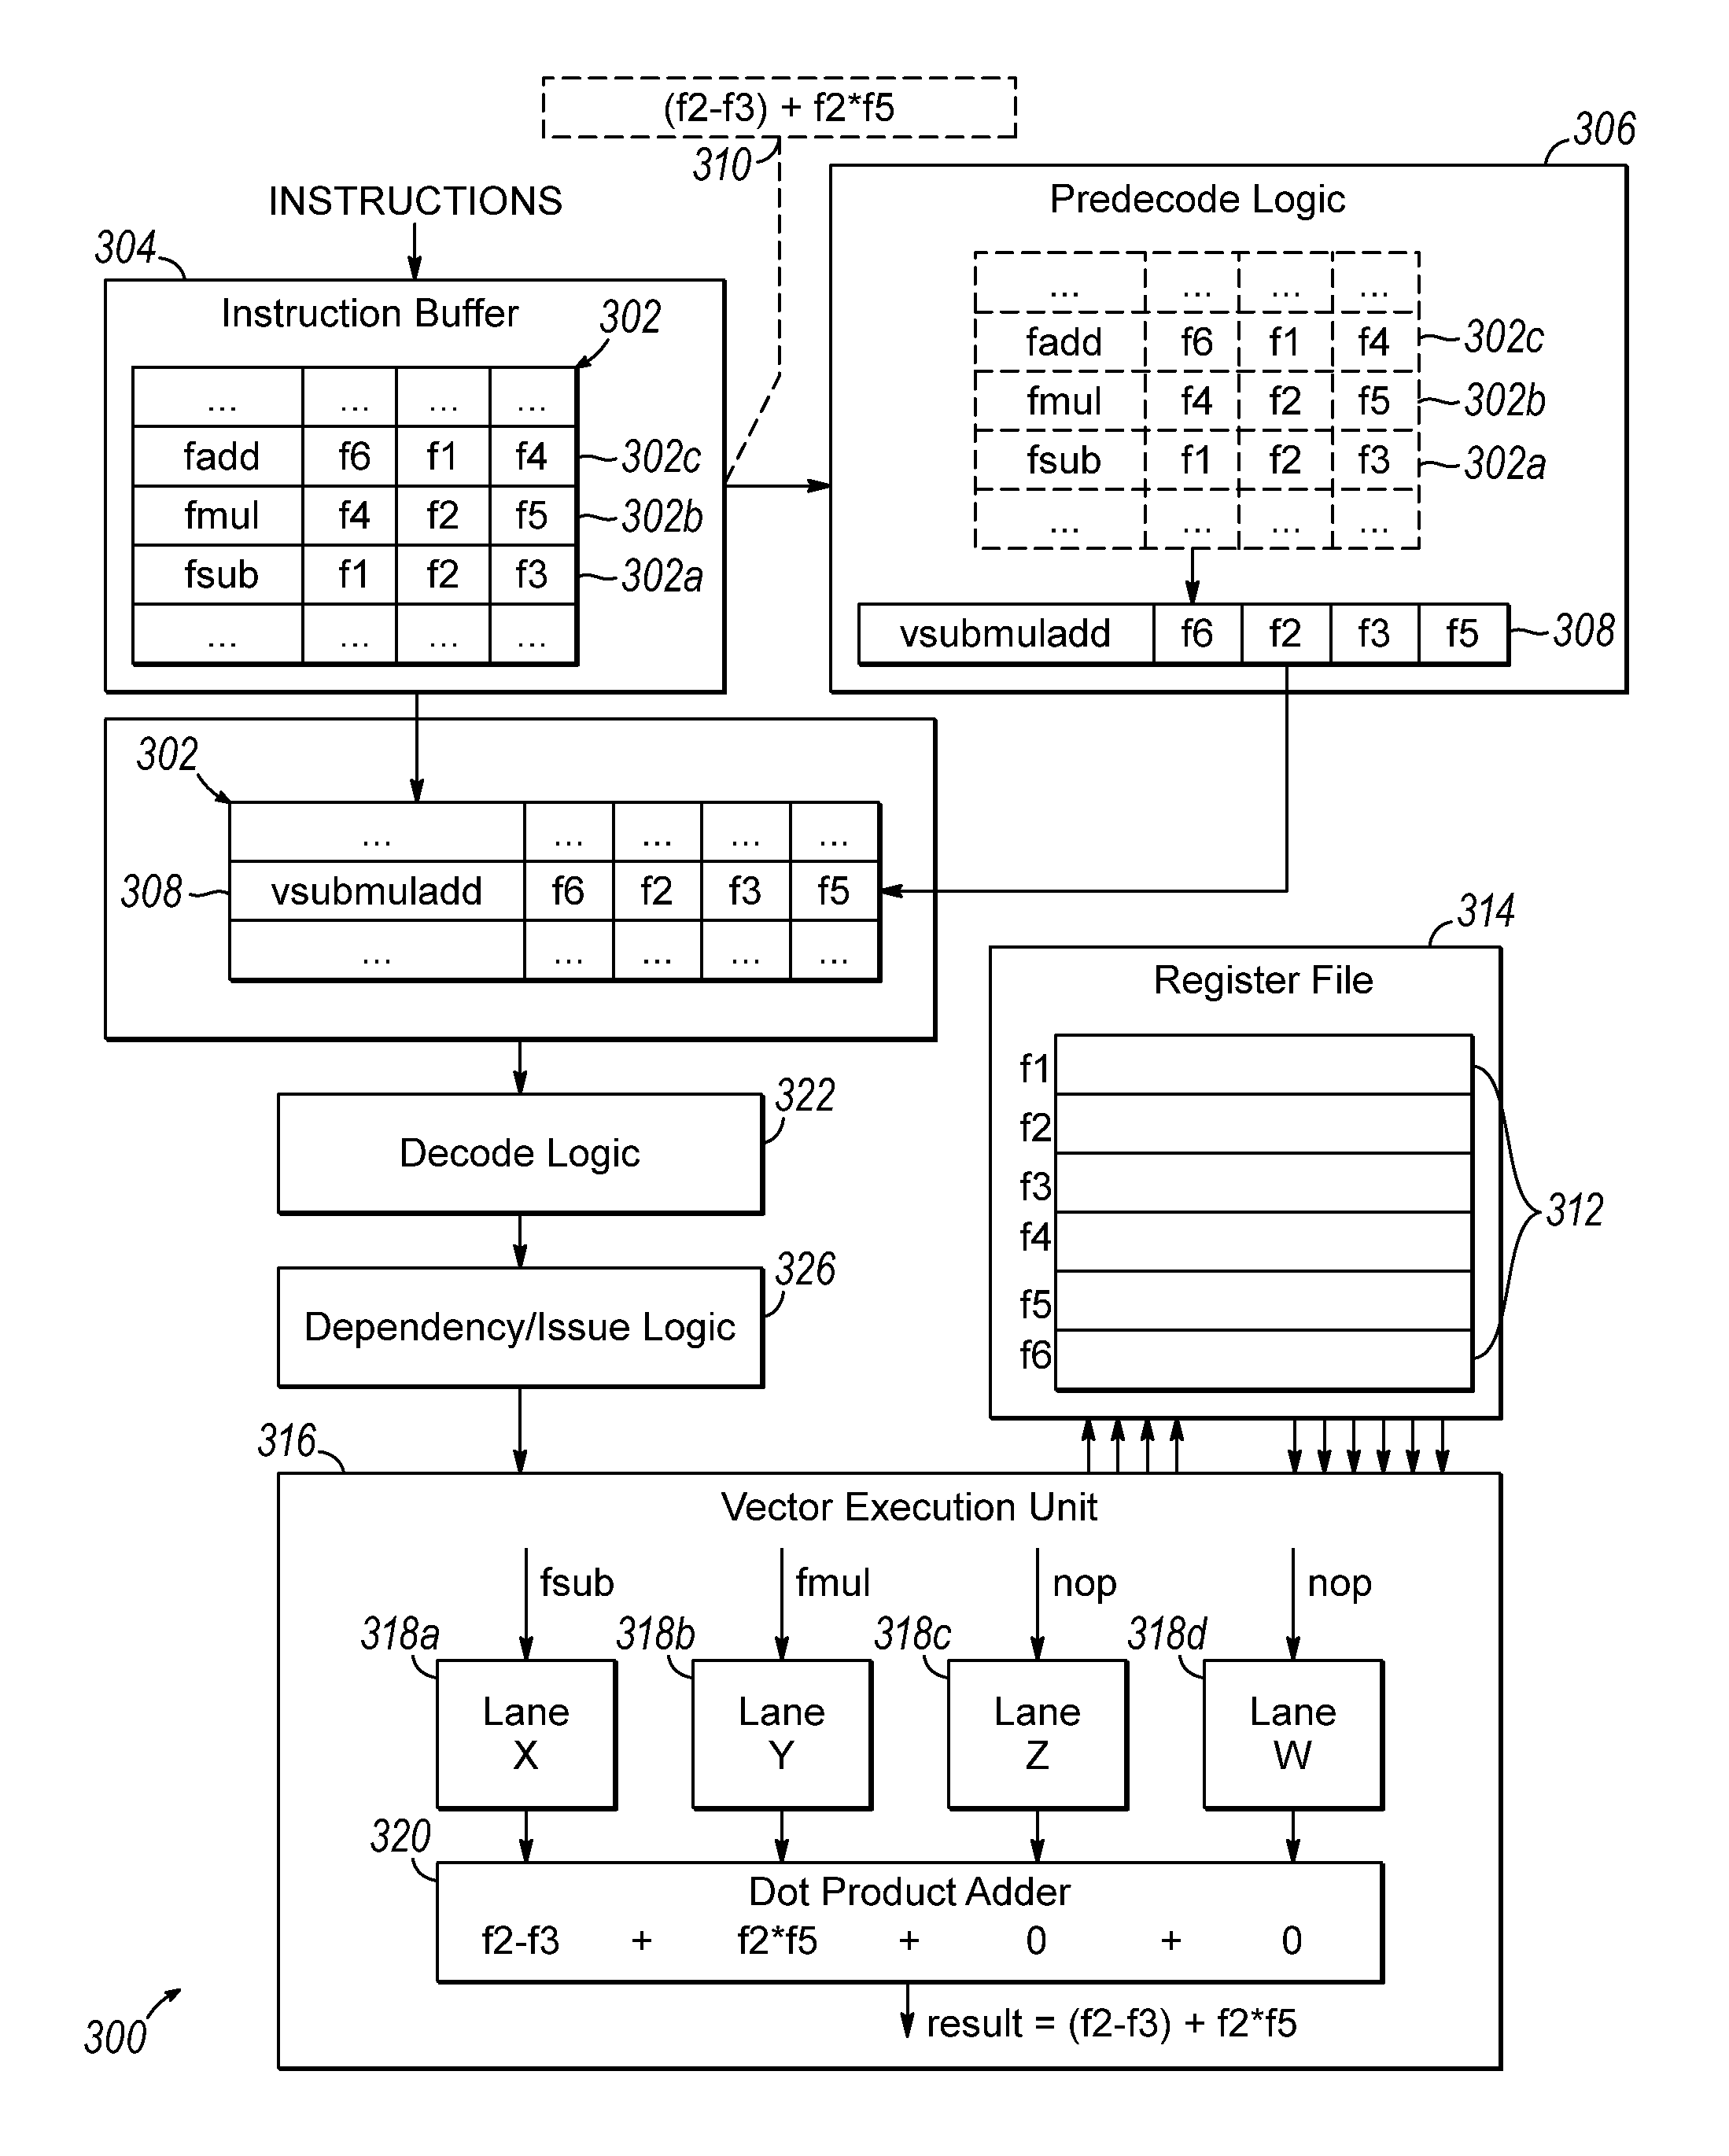 Predecode logic for autovectorizing scalar instructions in an instruction buffer